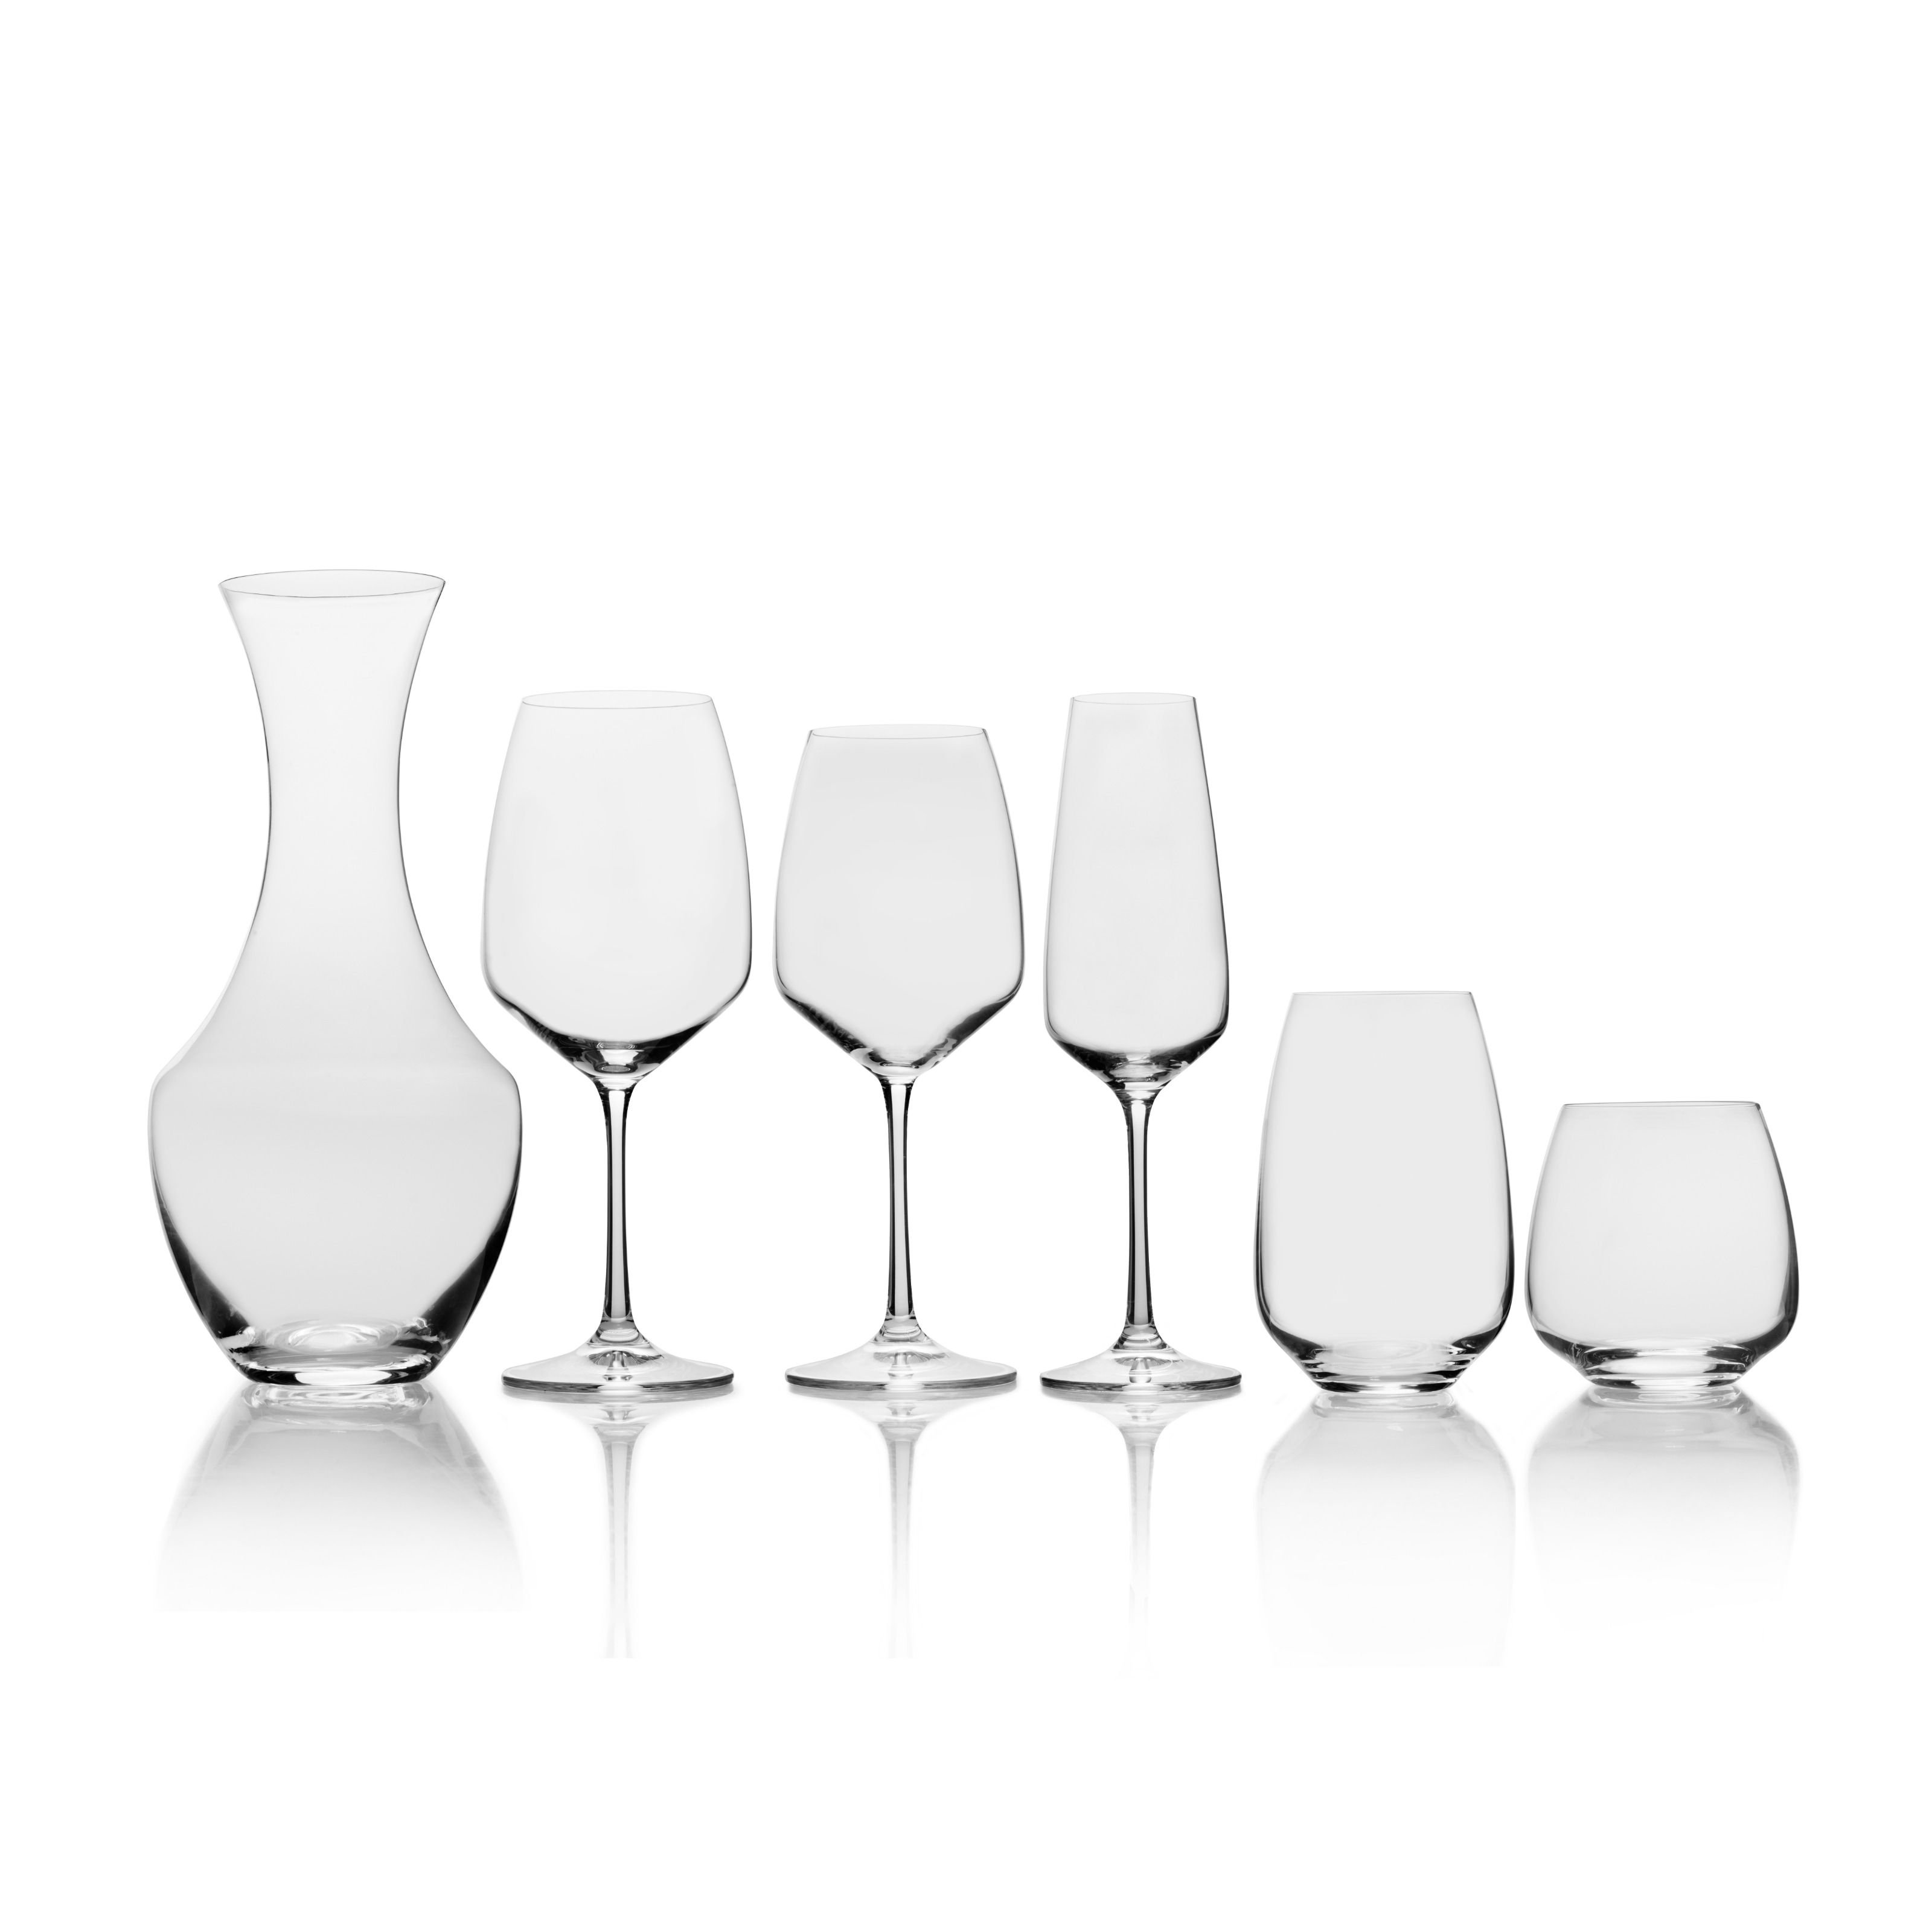 https://ak1.ostkcdn.com/images/products/is/images/direct/df42b96de3842aa183dff387485a1bbfff67d19f/Mikasa-Melody-15OZ-White-Wine-Glass-%28Set-of-4%29.jpg